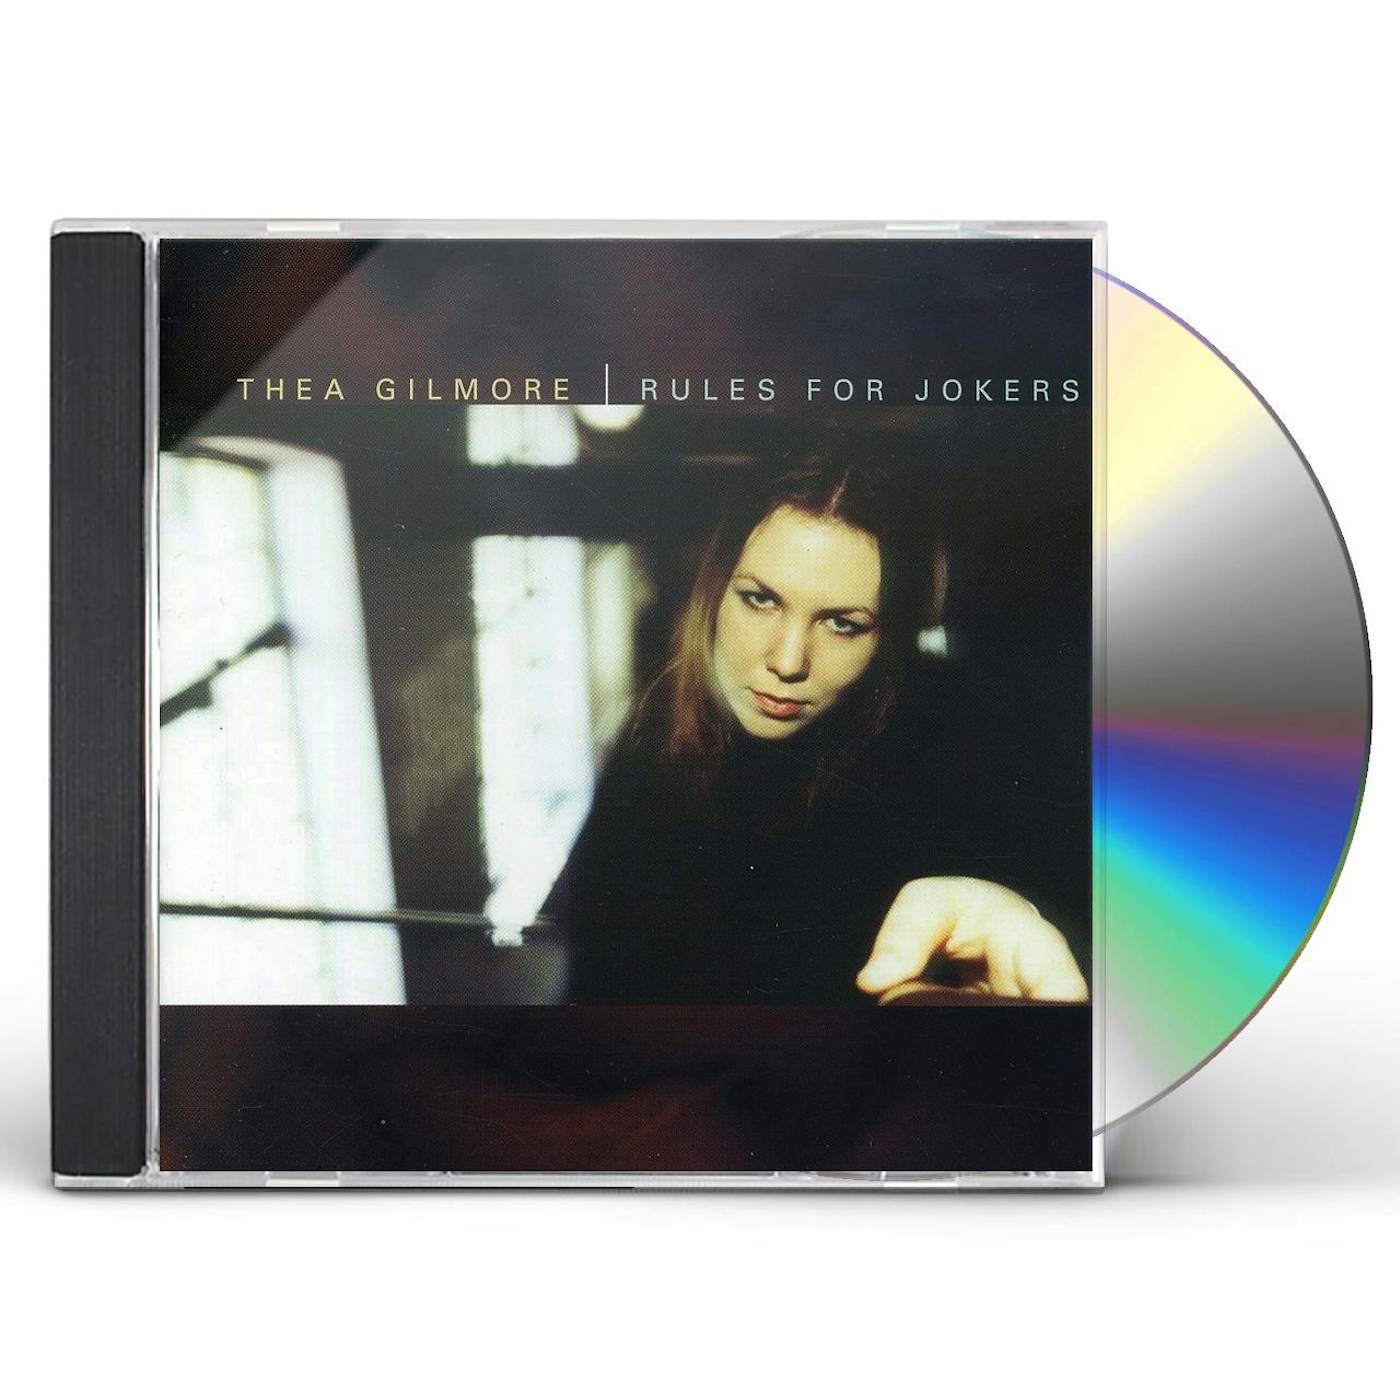 Thea Gilmore RULES FOR JOKERS CD